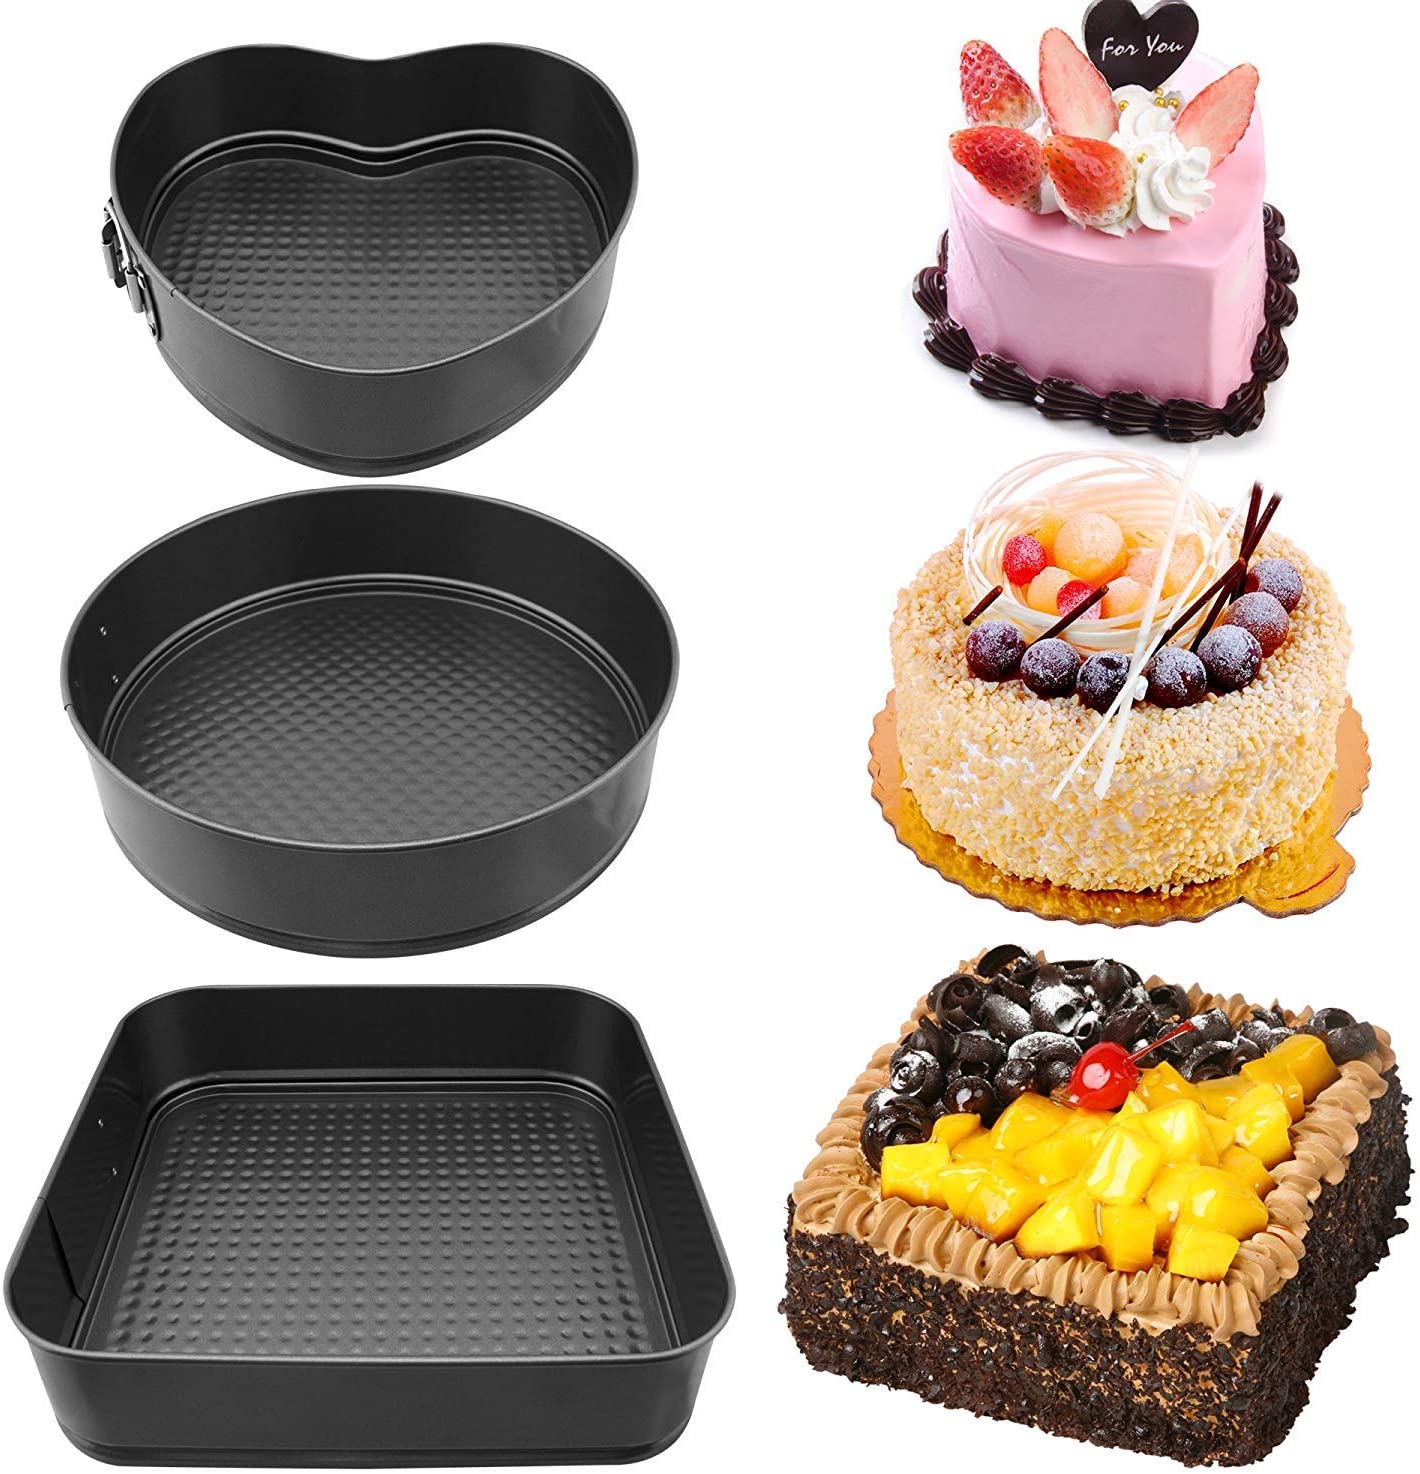 Amazon.com: P&P CHEF 8 Inch Cake Pan Set, 3 Pcs Round Baking Pans Stainless  Steel Layer Birthday Wedding Cake Pans, Fit Oven/Pots/Pressure Cooker, Non  Toxic & Heavy Duty, Dishwasher Safe : Everything